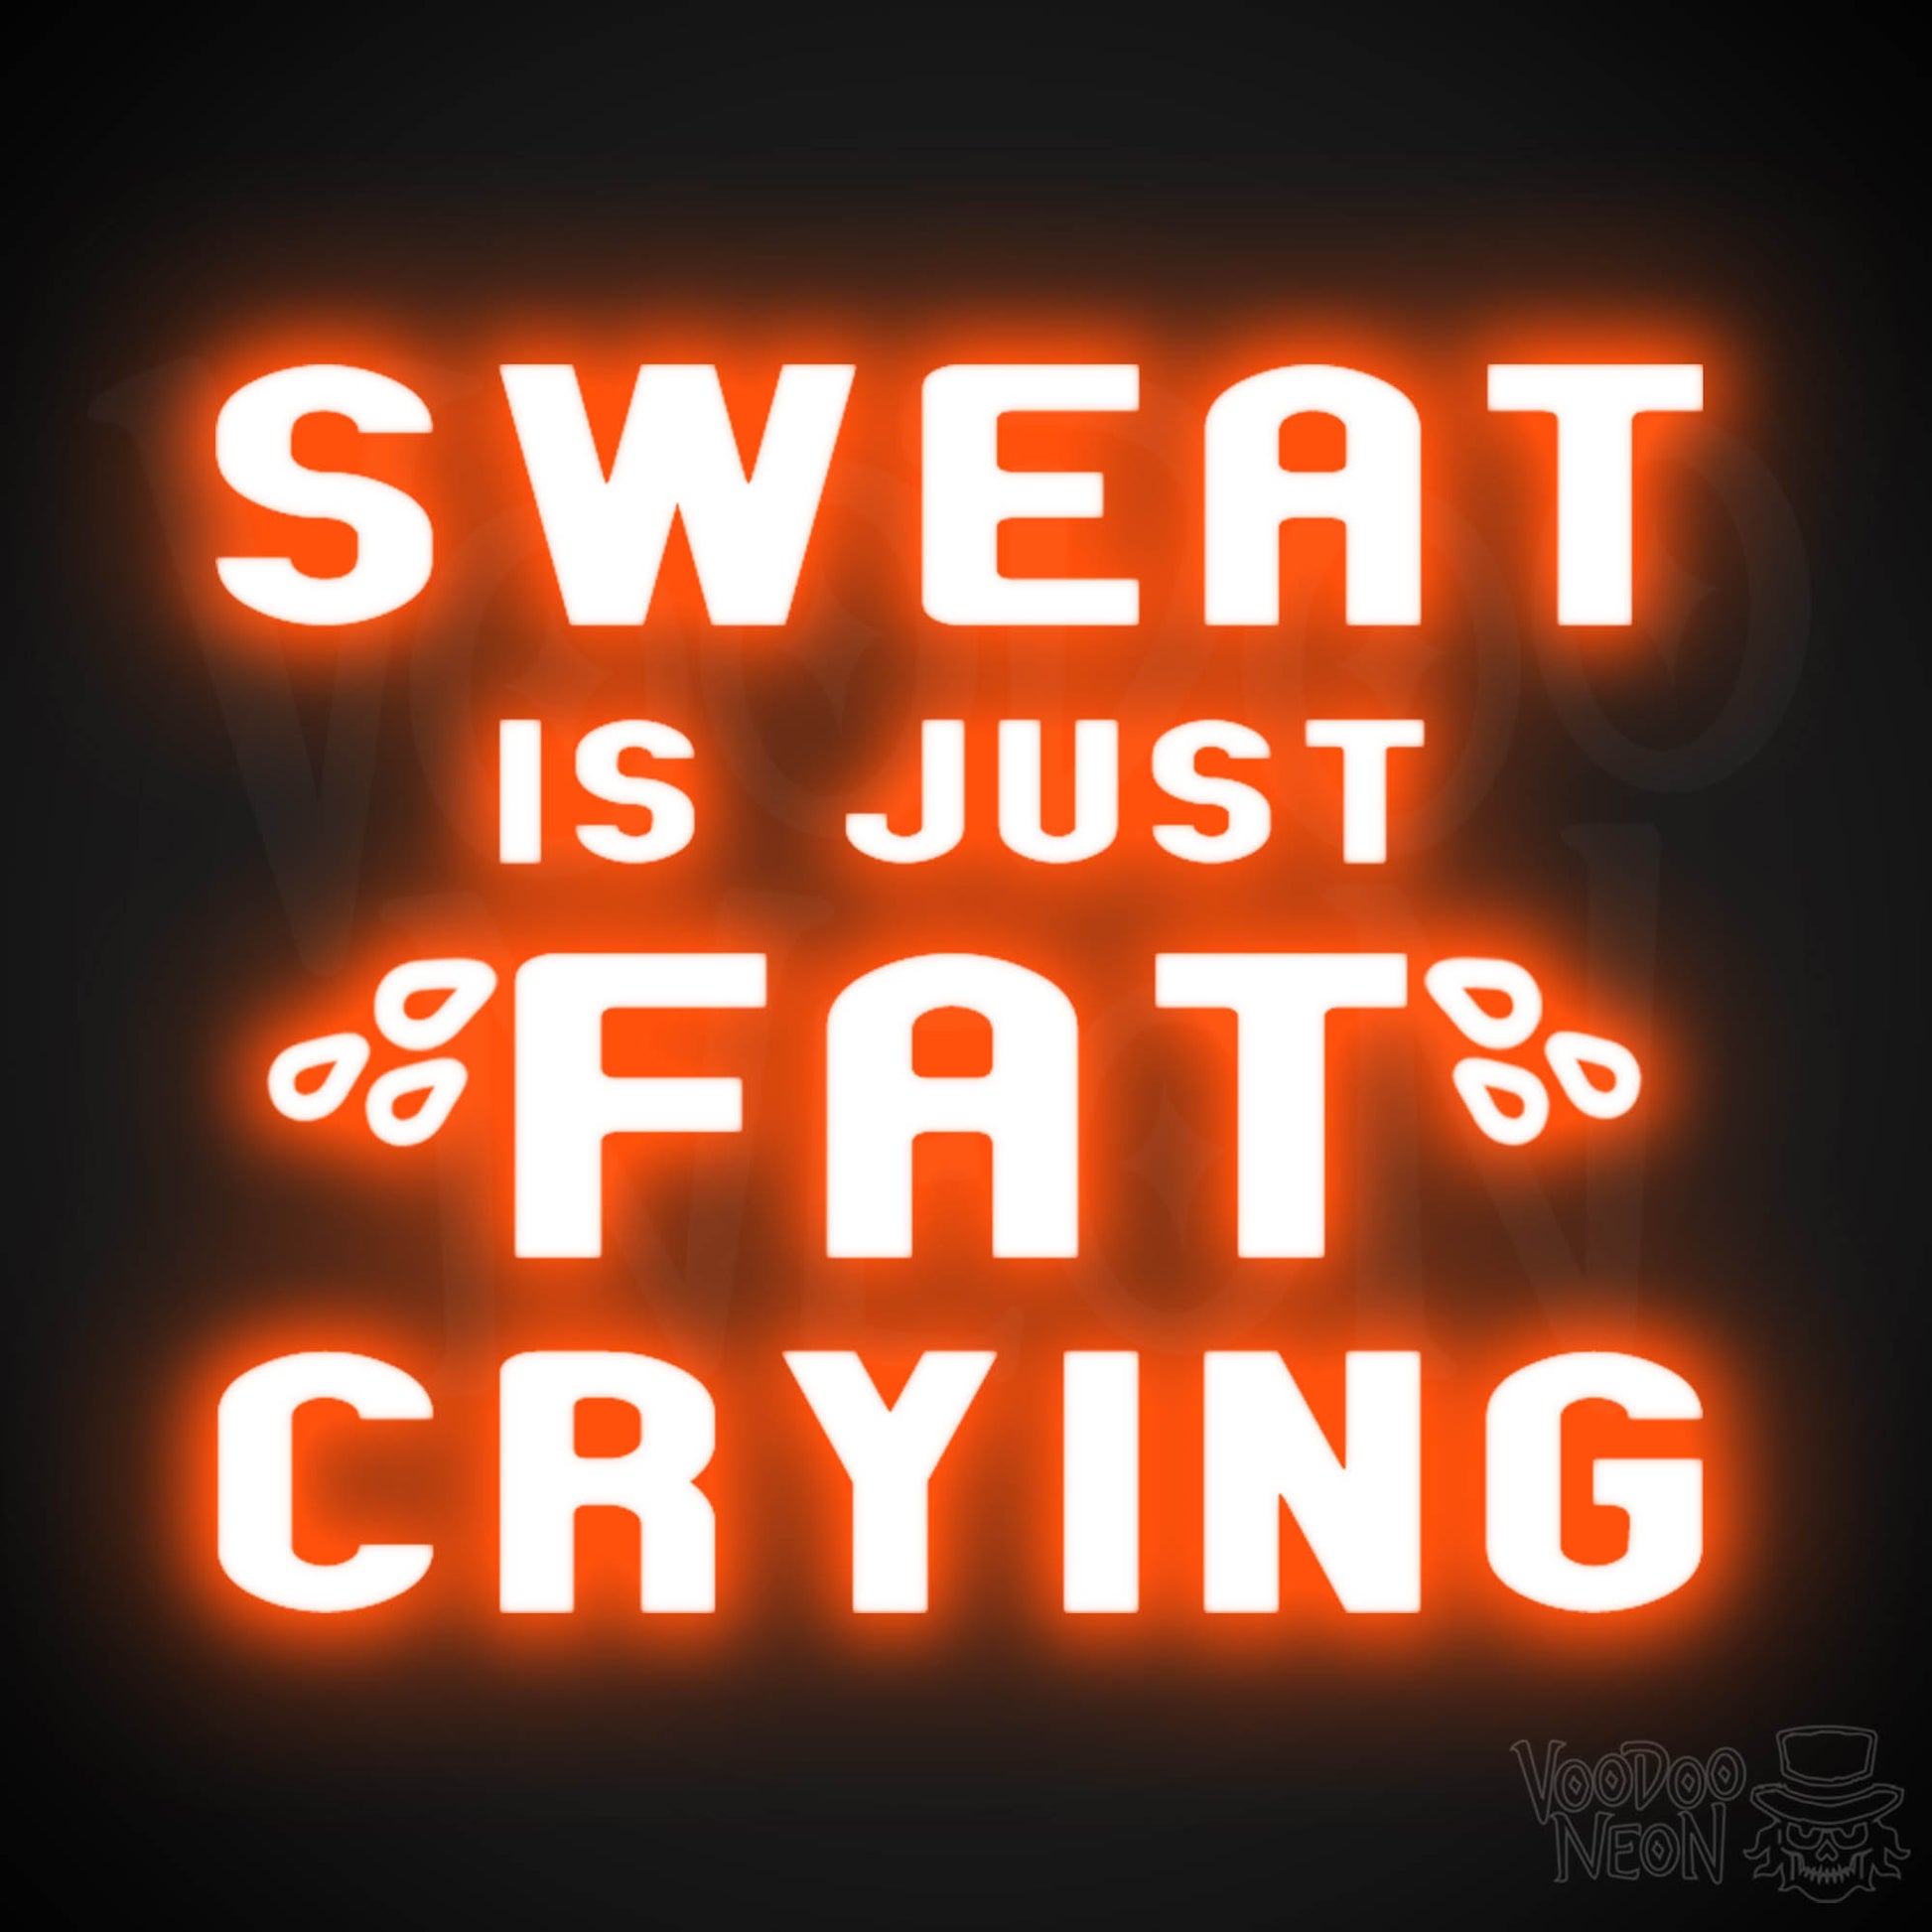 Sweat Is Just Fat Crying Neon Sign - Sweat Is Just Fat Crying Sign - LED Lights - Color Orange